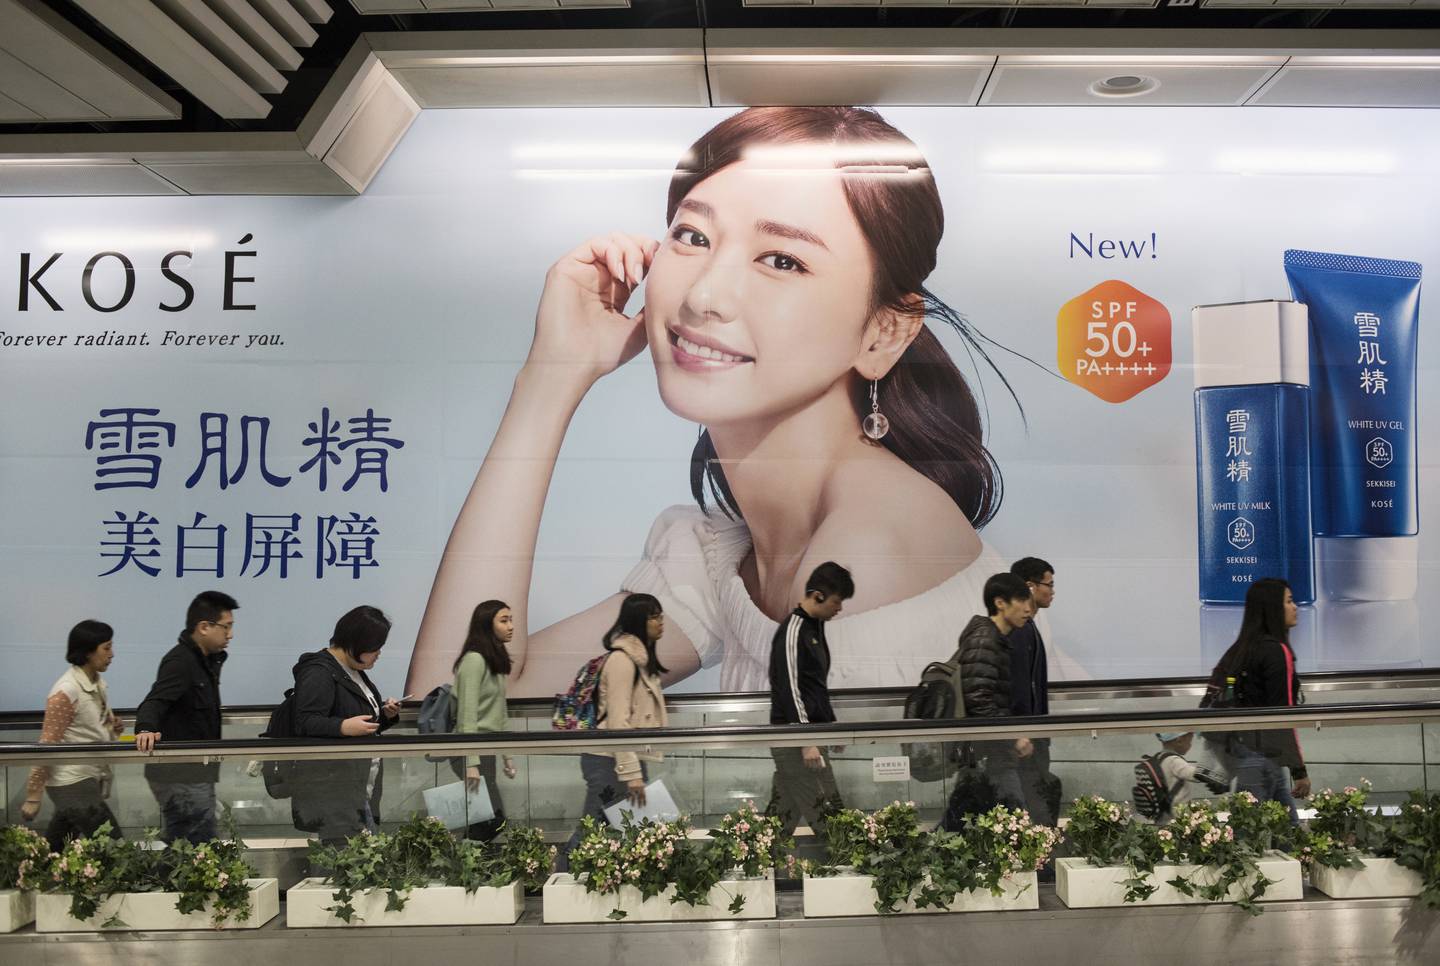 Commuters at Hong Kong's MTR station pass by a large advertising of cosmetic and skin care Sekkisei.